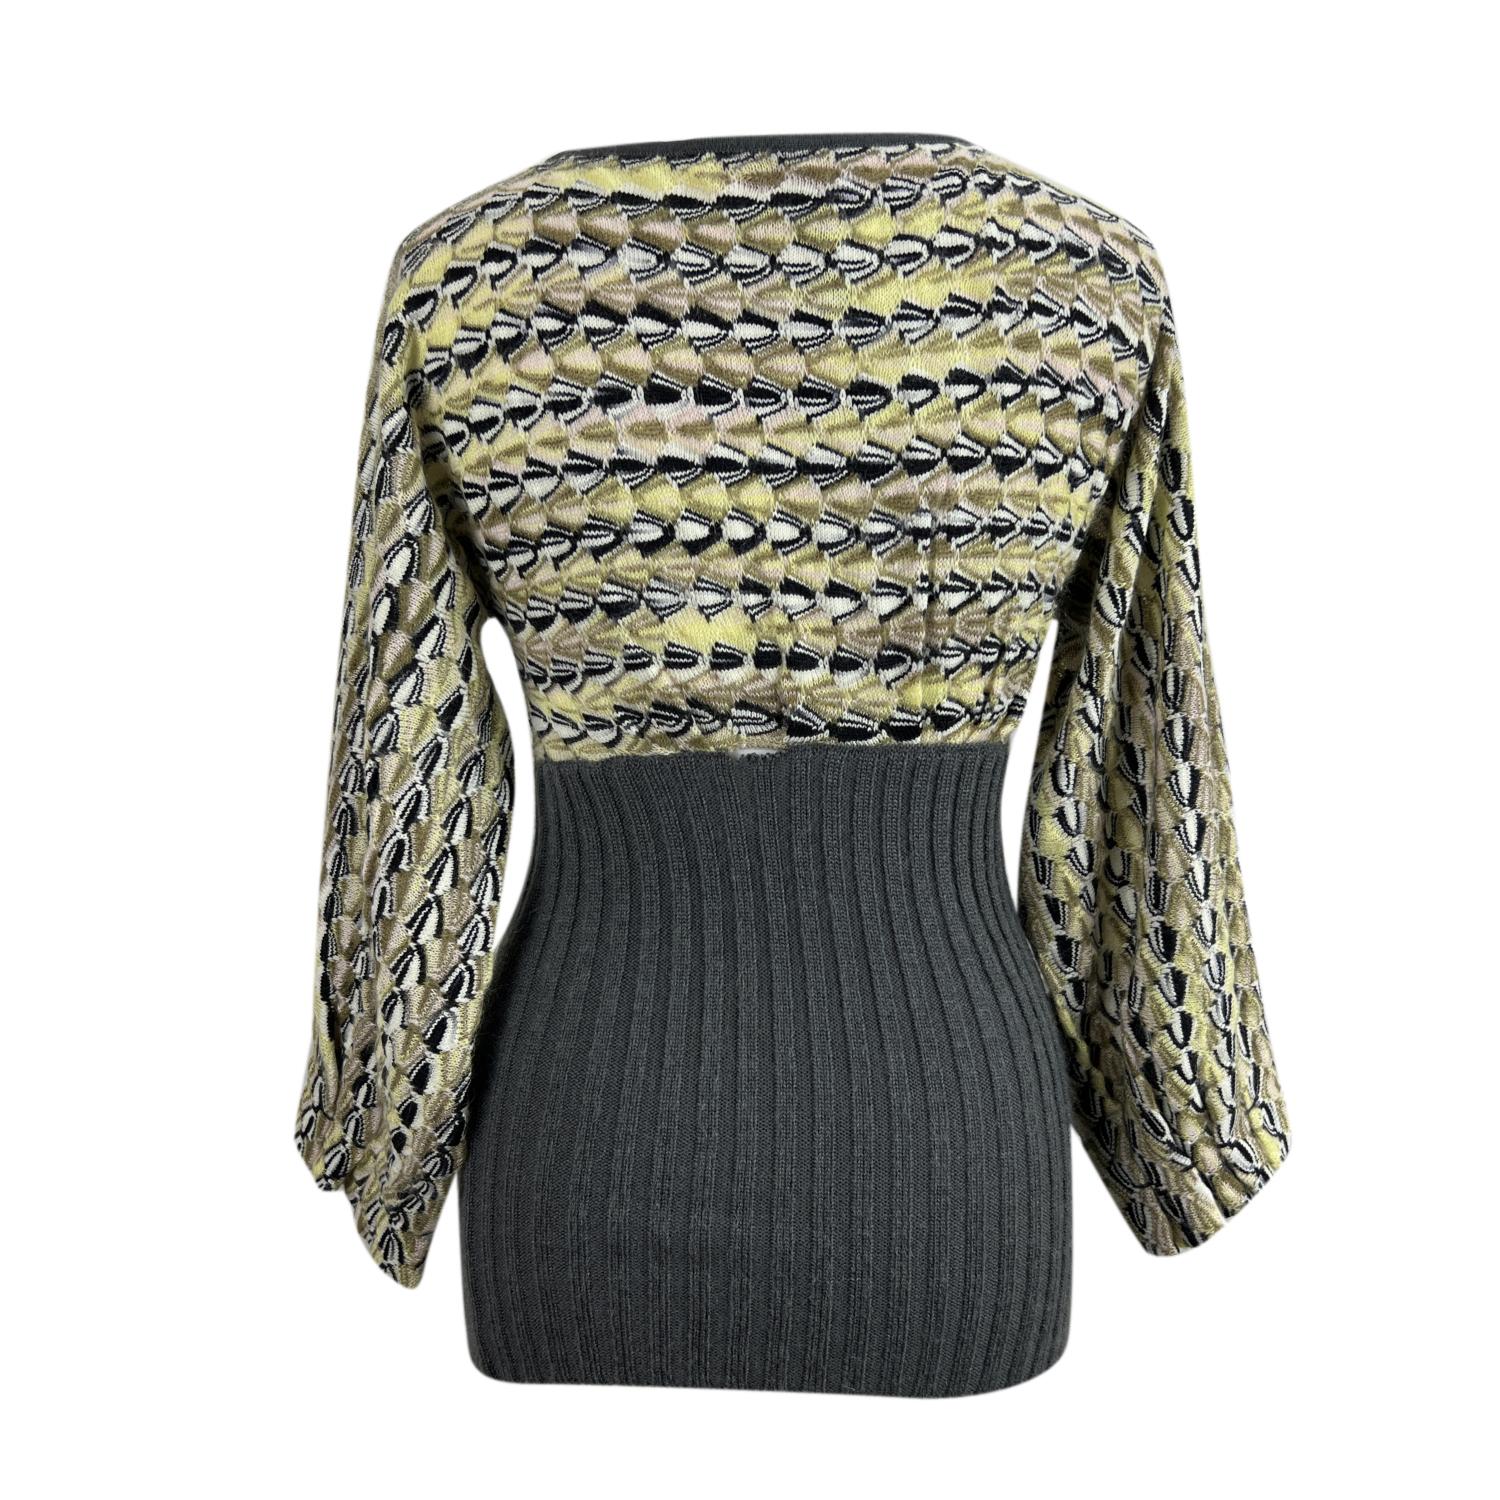 Missoni long sleeve jumper. Boat neck. Composition: 65% Wool, 25% Mohair, 10% Nyon. Size: 38 IT (The size shown for this item is the size indicated by the designer on the label). It should correspond to a EXTRA-SMALL size.

Details

MATERIAL: